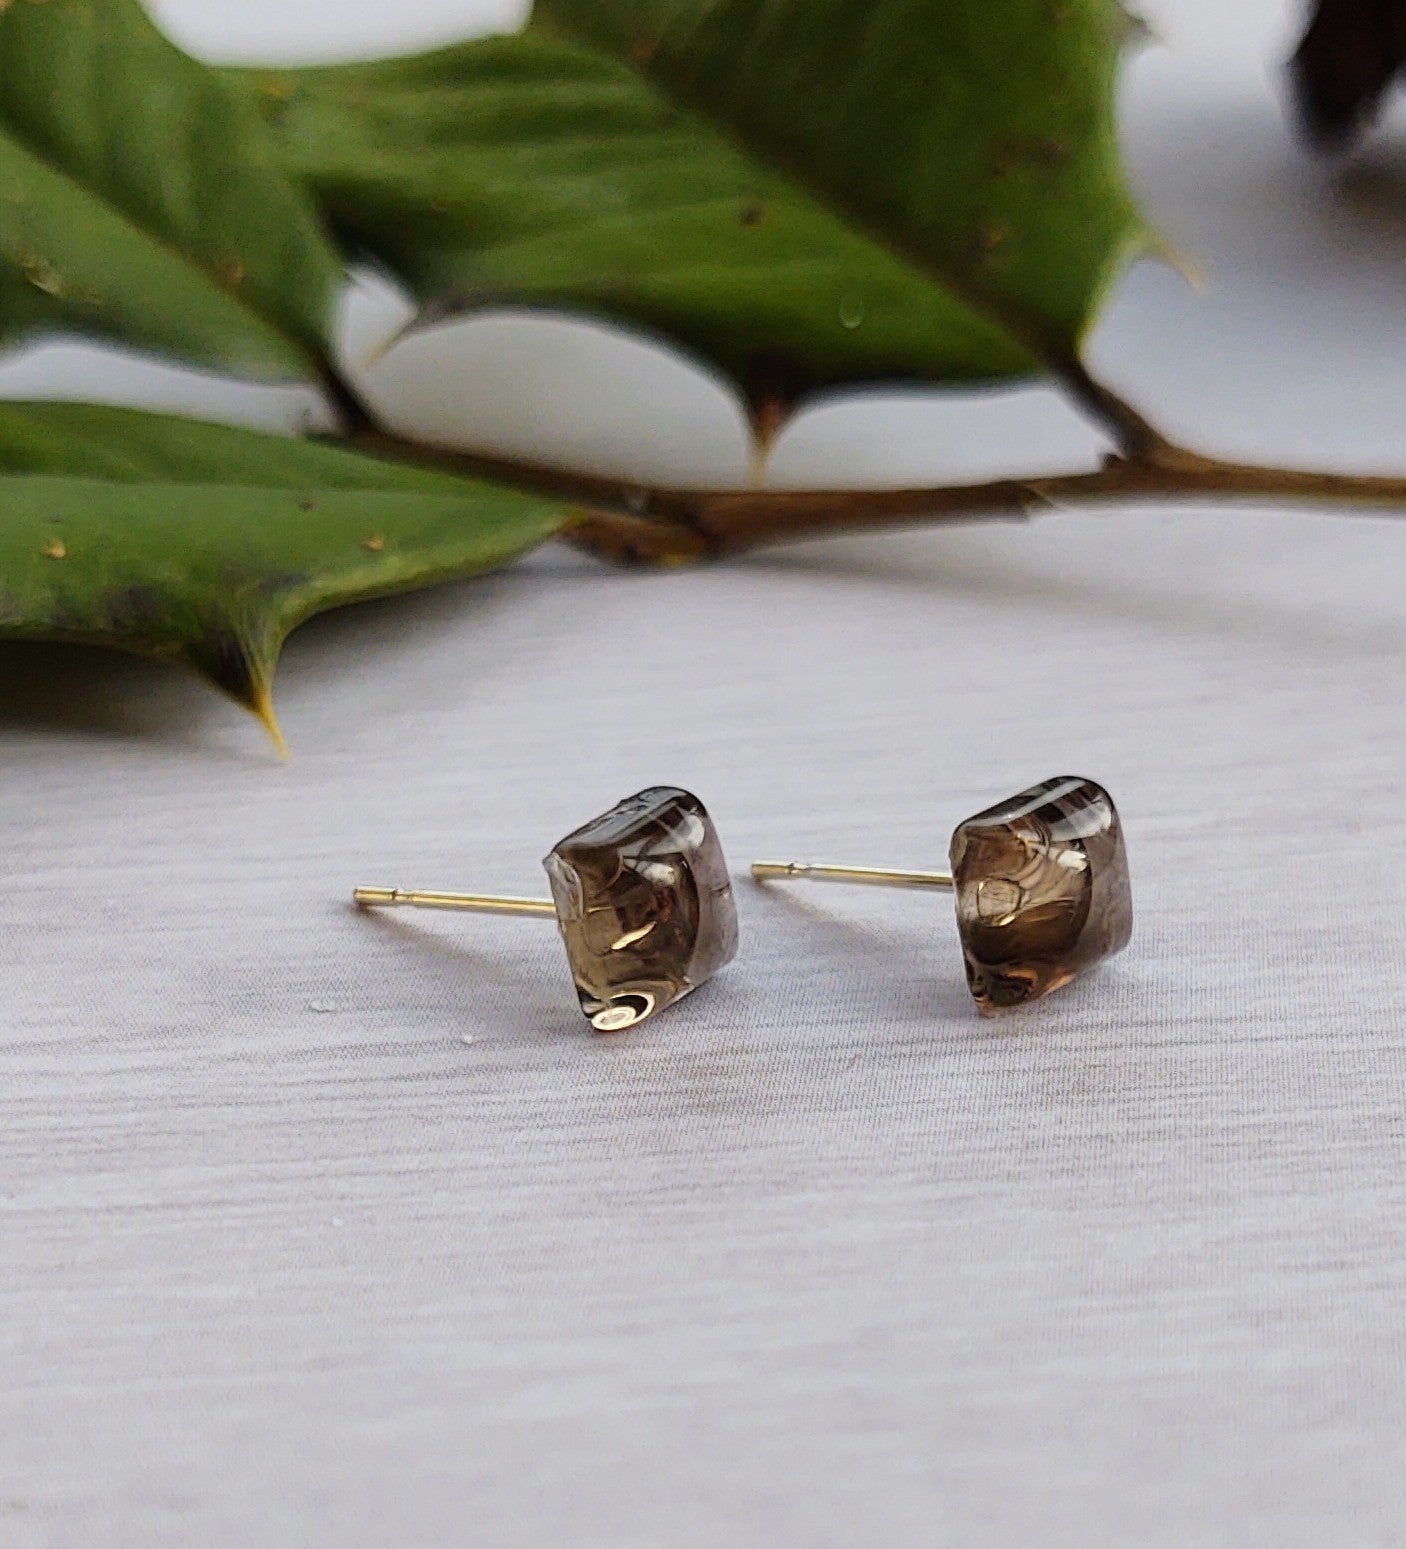 For Small Delights: Smoky Quartz earrings